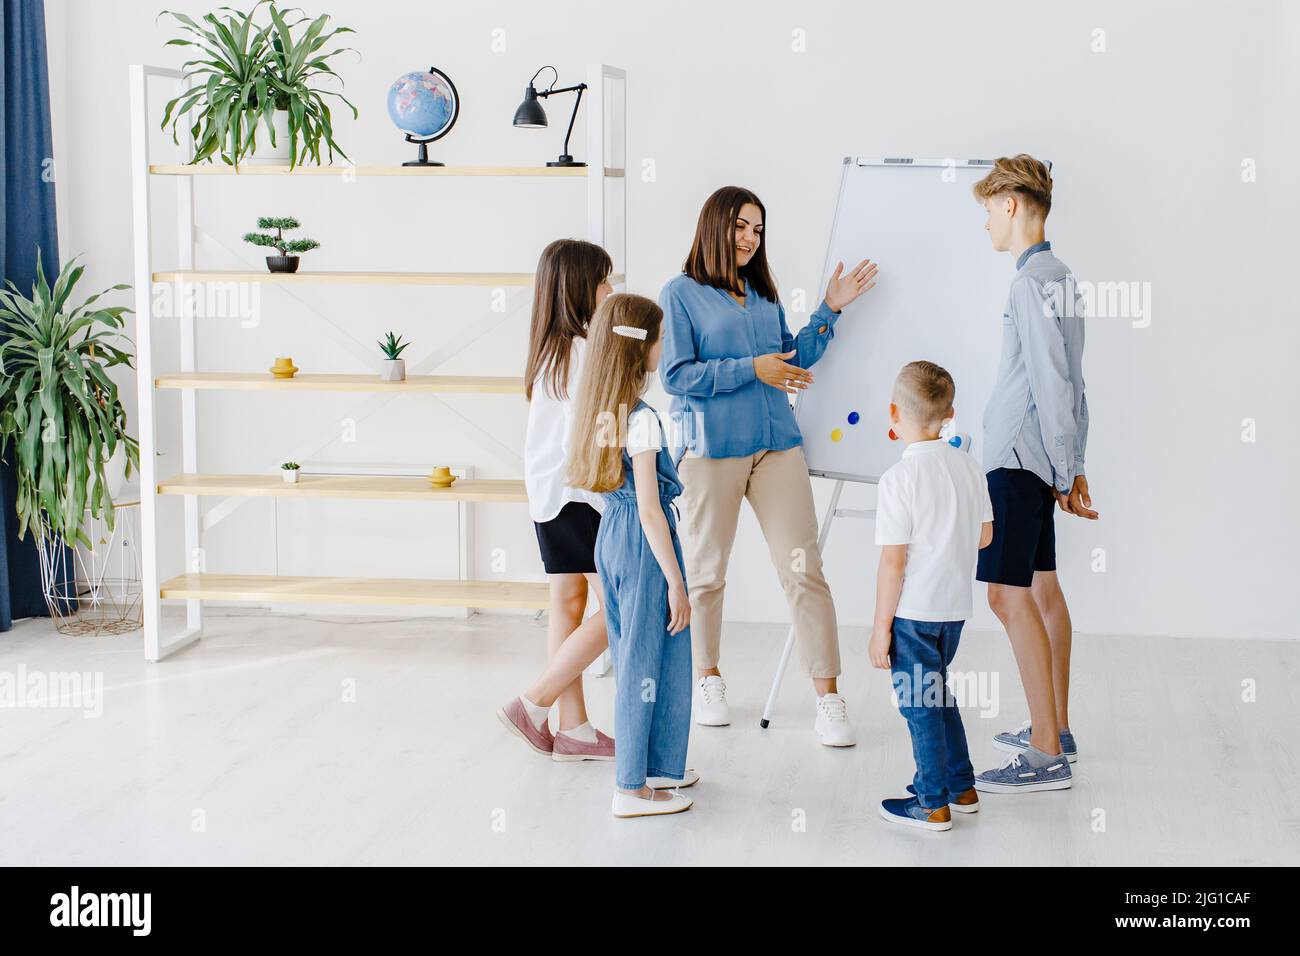 Explaining lesson and using board. Group of children students of different ages in class at school with teacher. Stock Photo